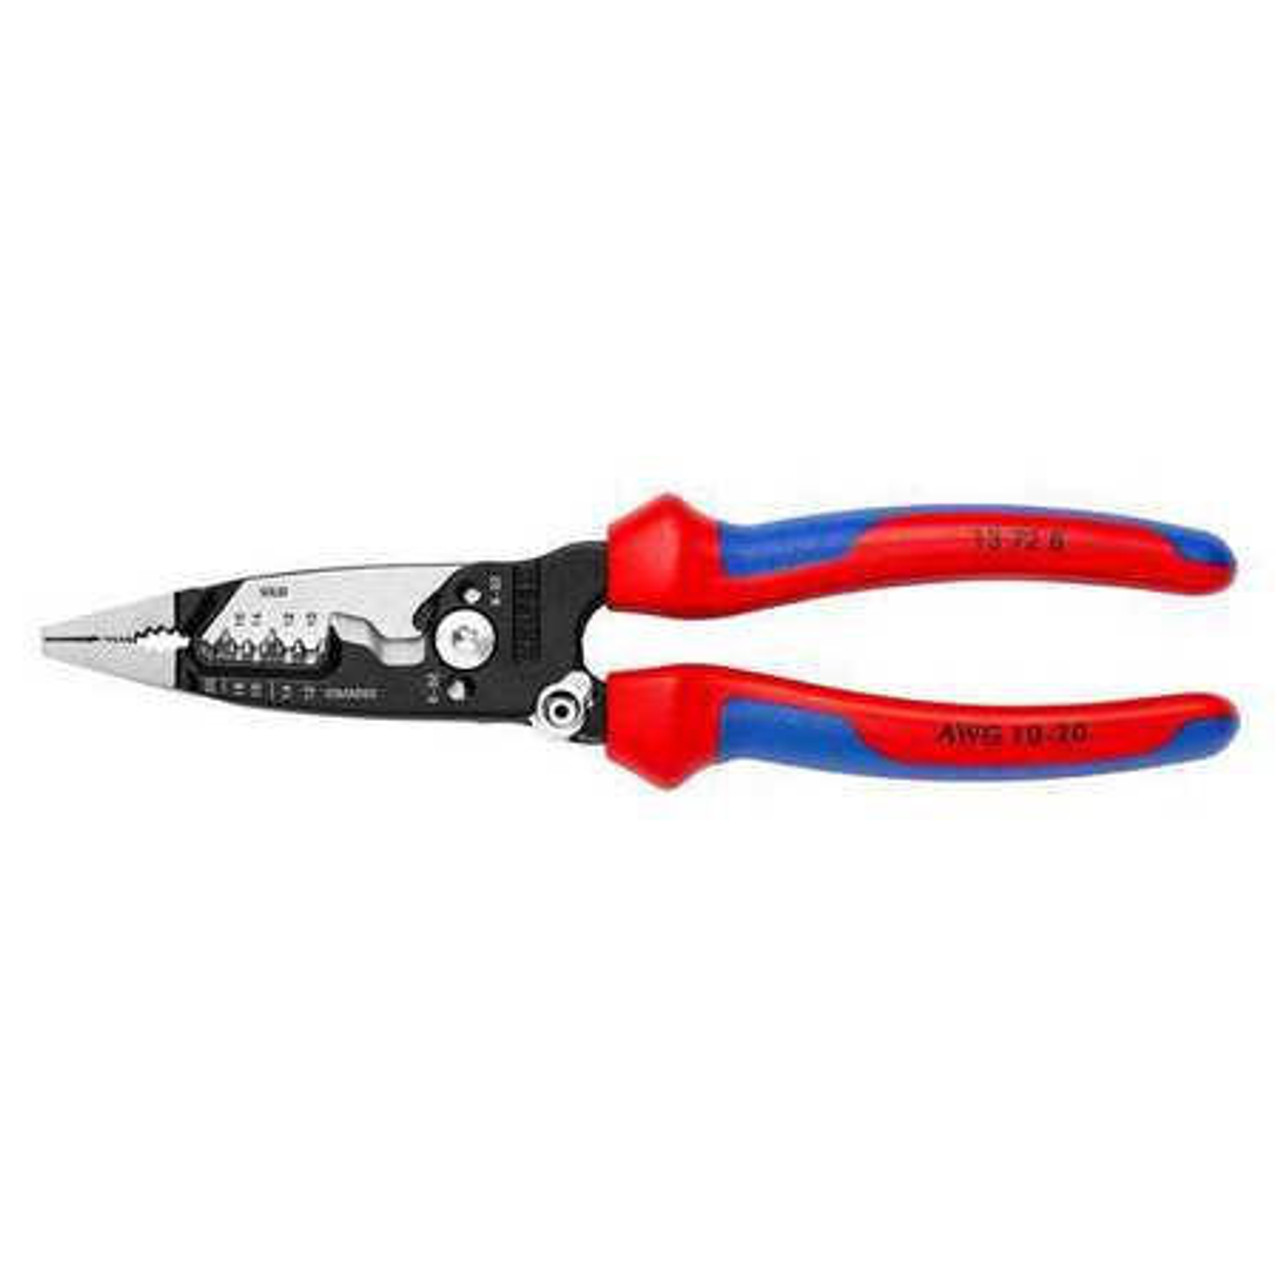 Knipex Forged Wire Strippers 8 13 72 8